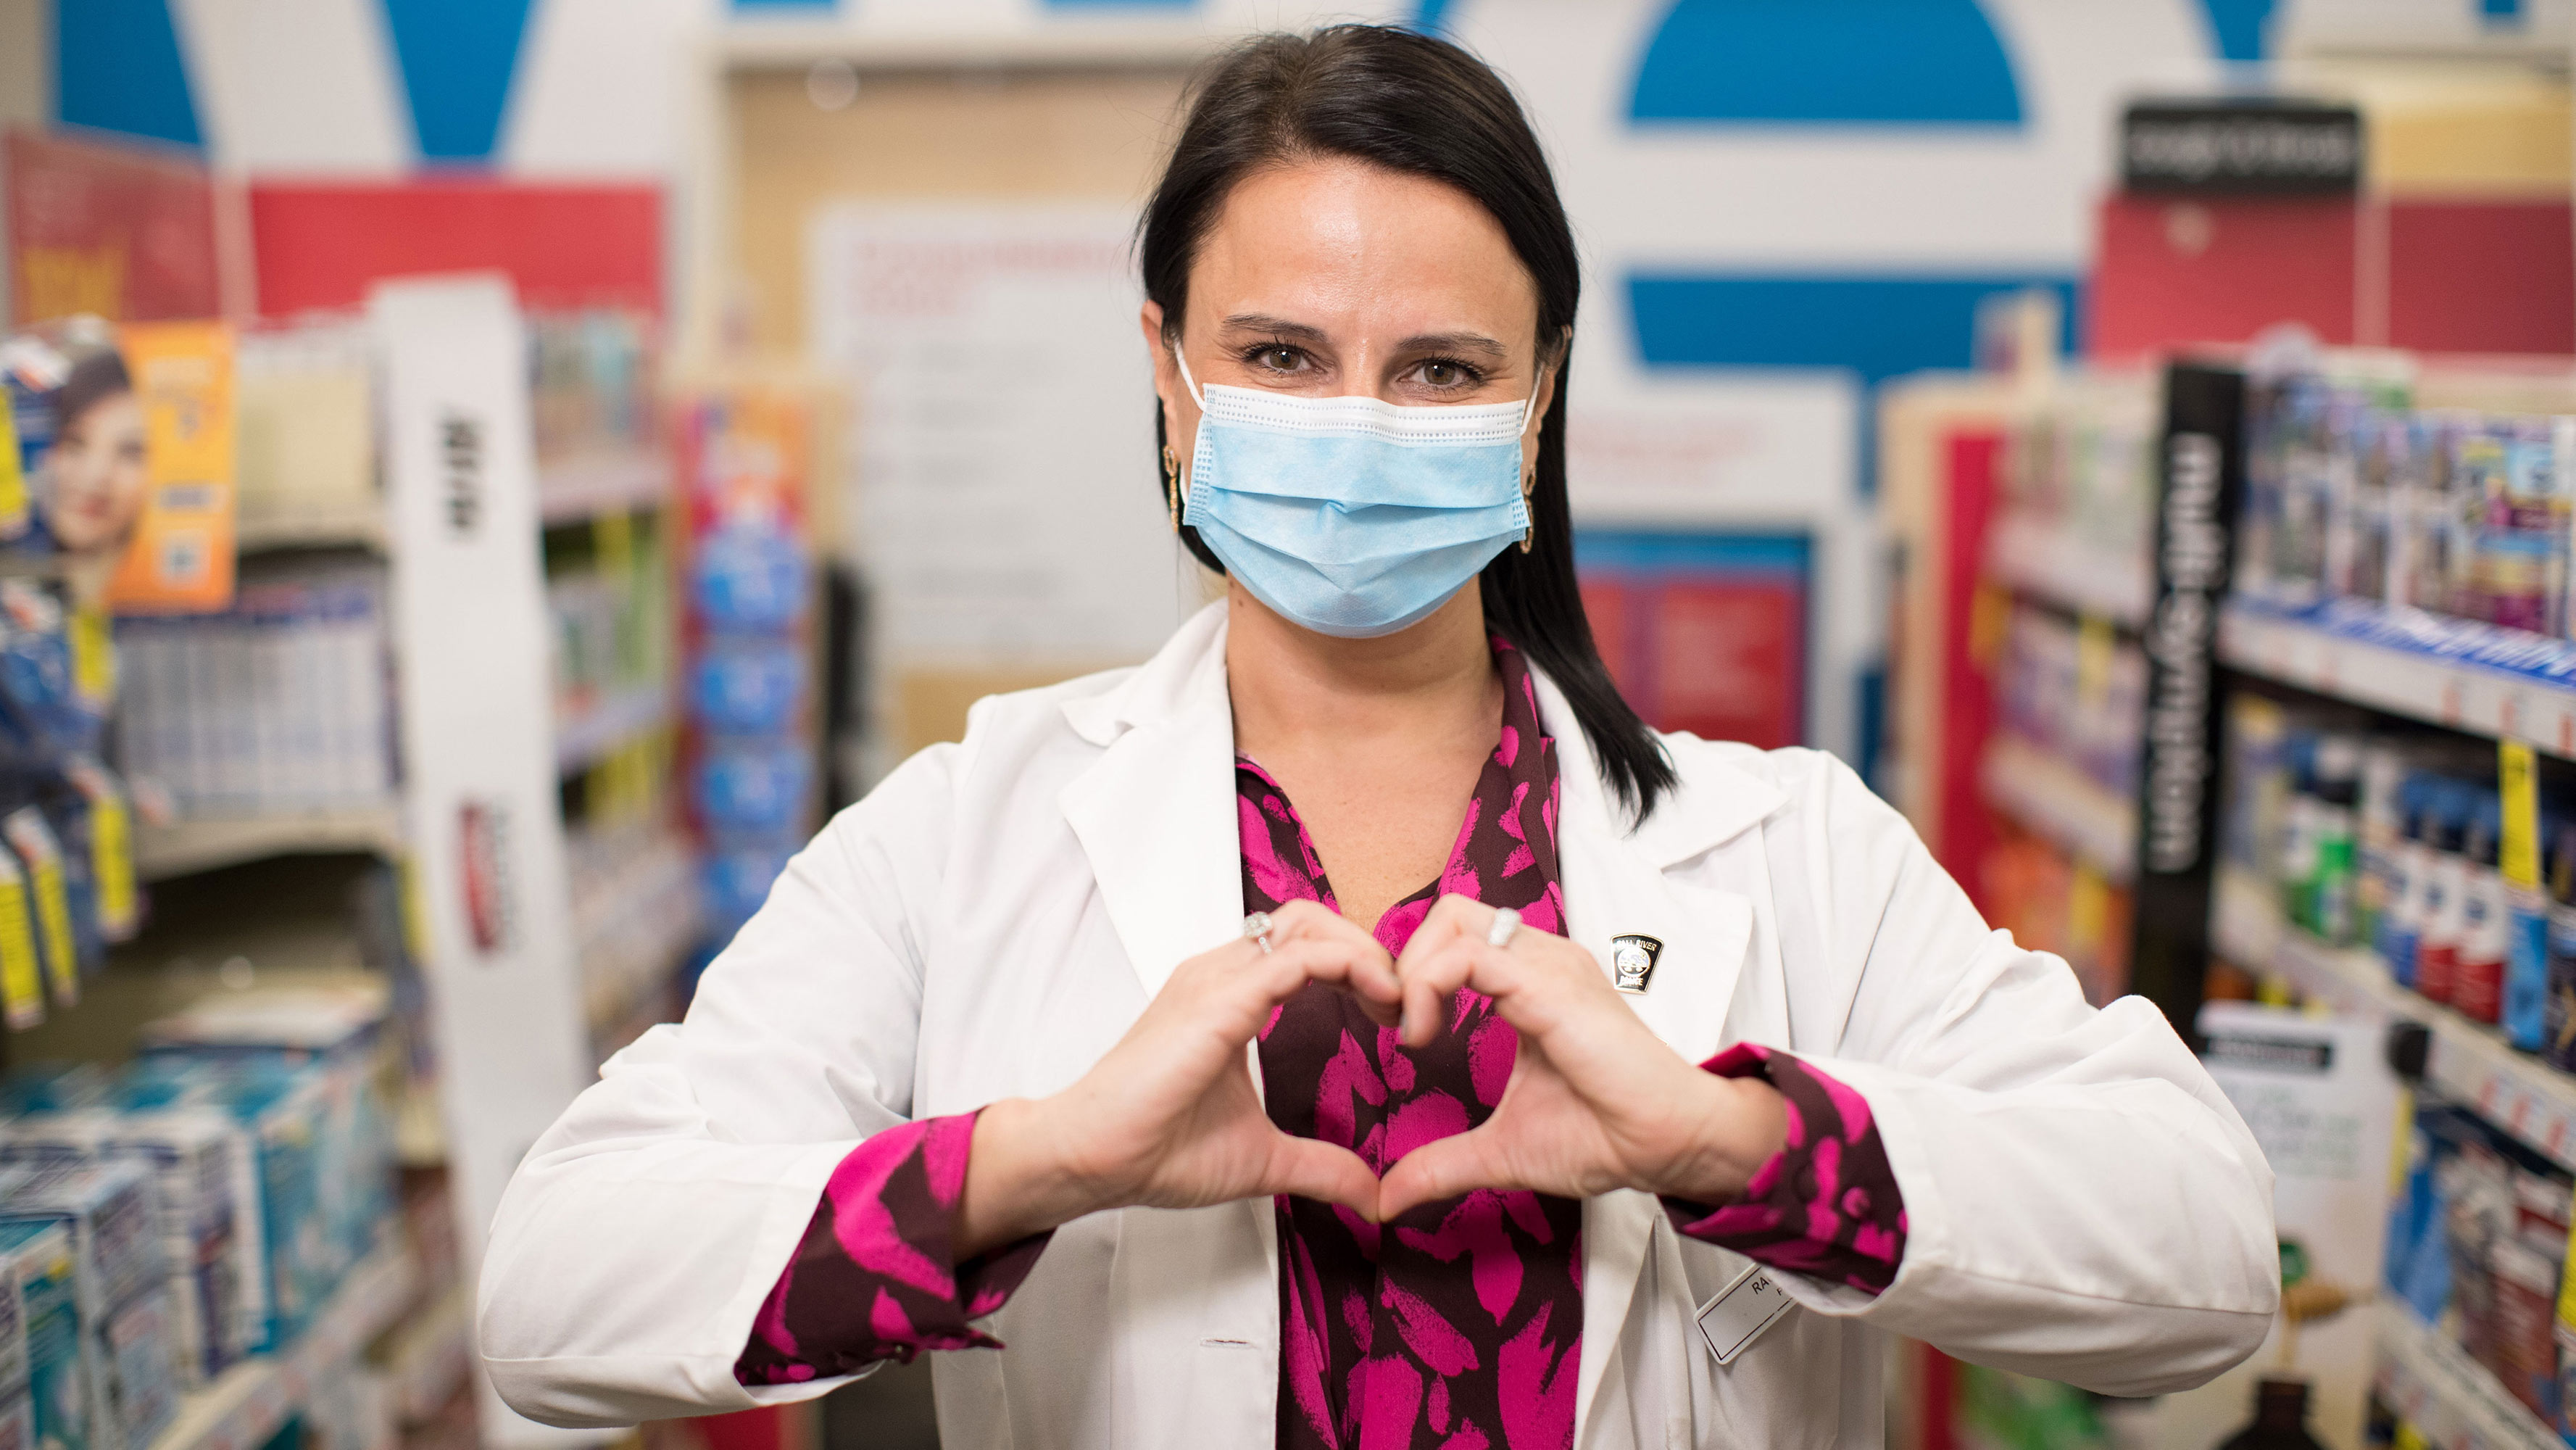 A CVS Pharmacy employee, wearing a face mask, makes a heart gesture with her hands as she stands in a CVS Pharmacy in Fall River, Massachusetts.